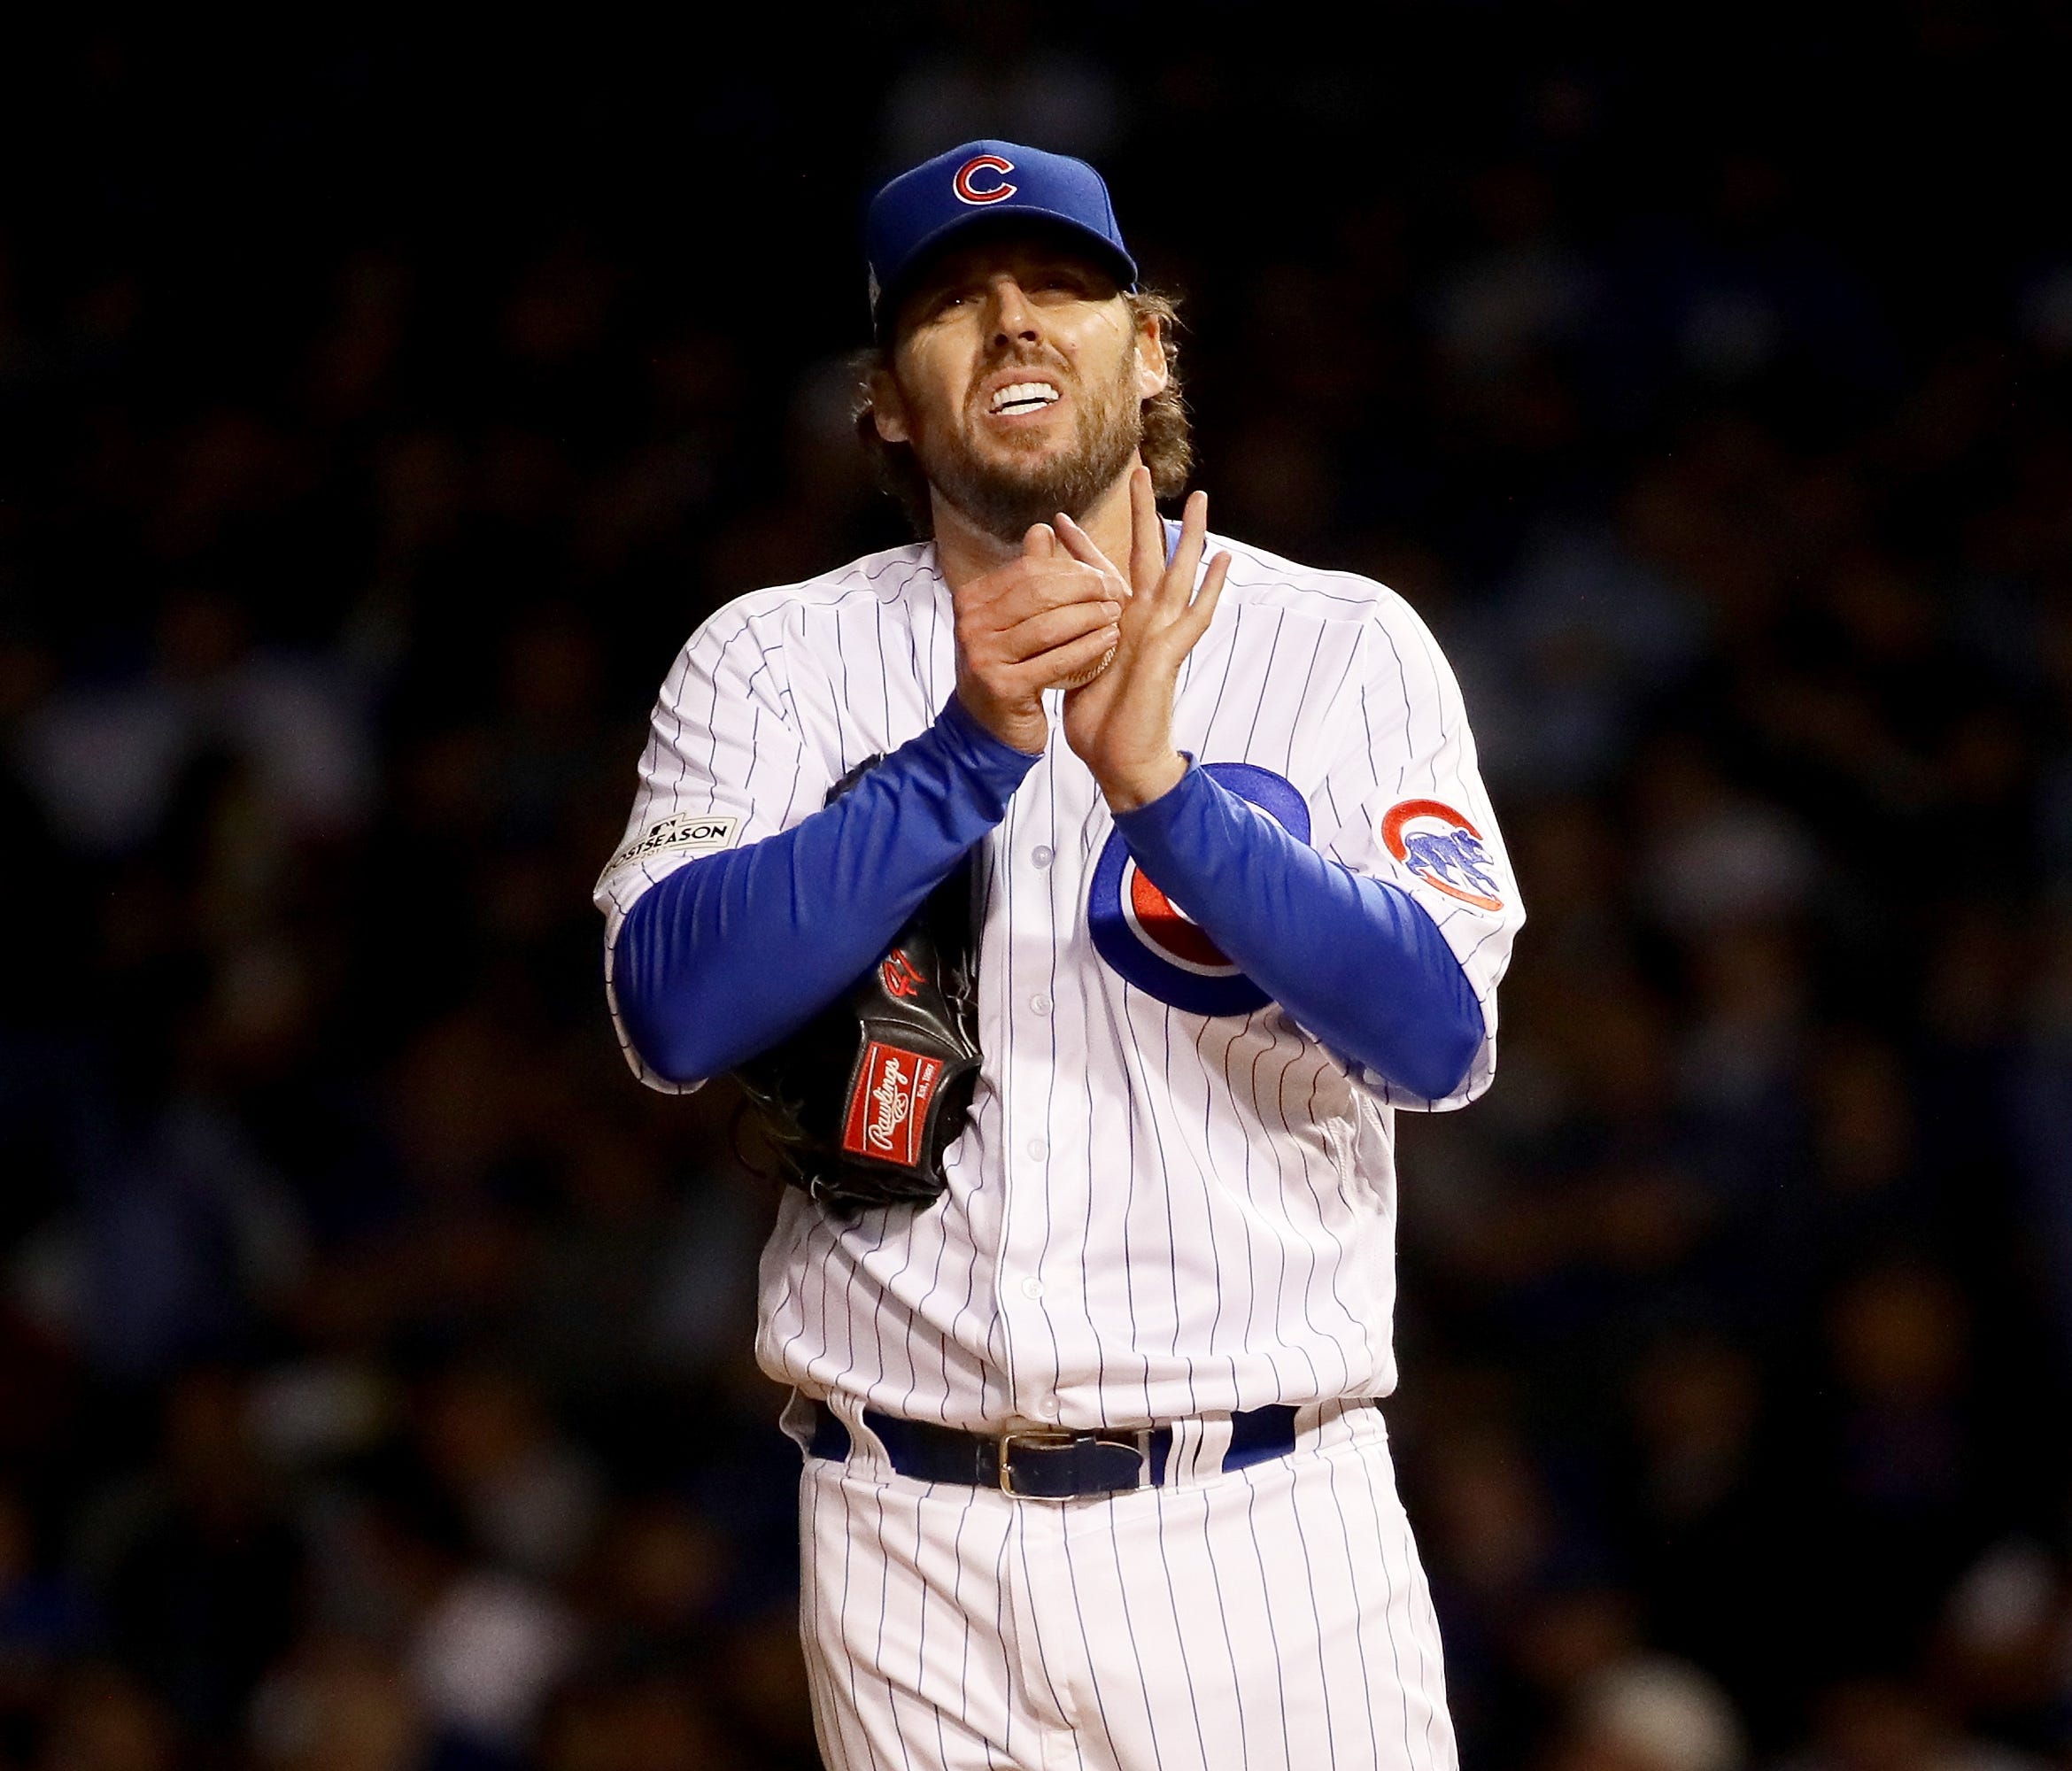 John Lackey, who gave up two runs in Game 5, and fellow right-hander Jake Arrieta will be free agents after this season.